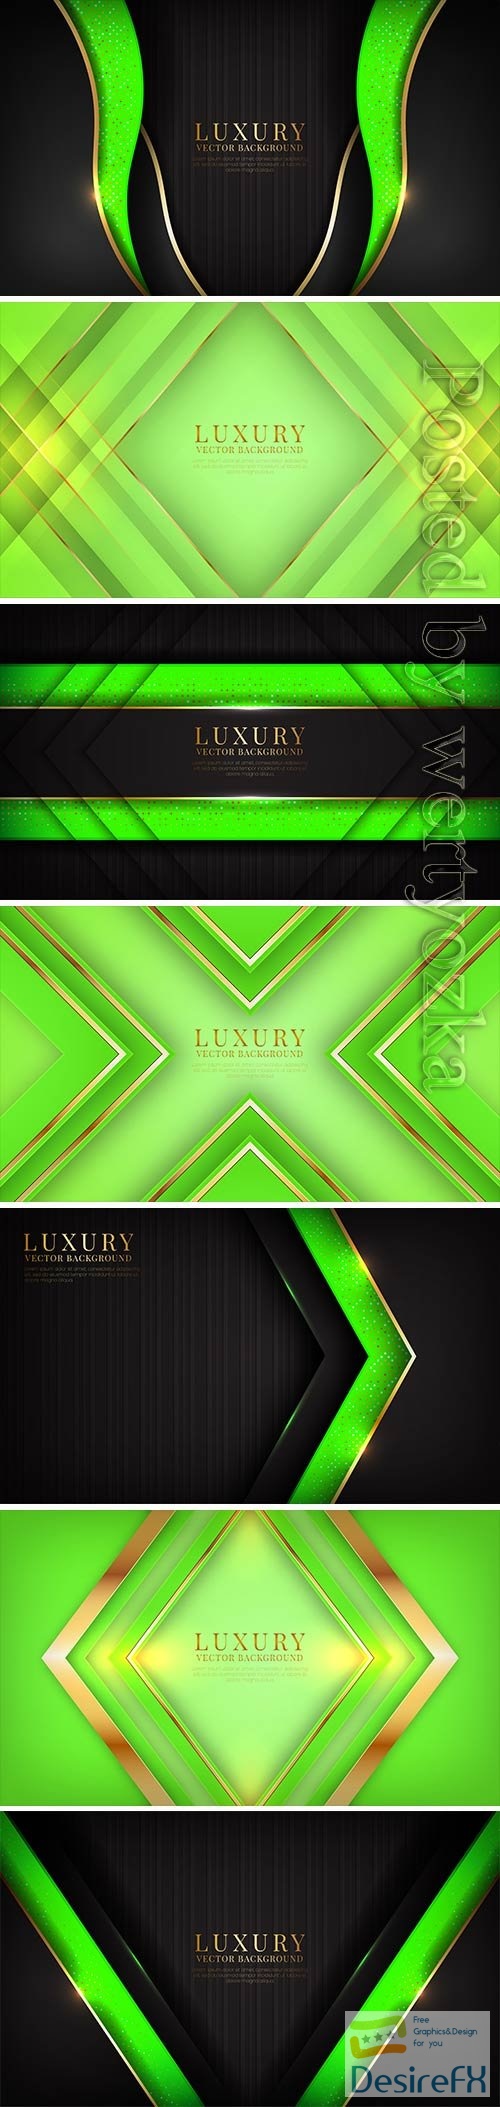 Abstract 3d green luxury background overlap layer with golden metallic lines effect